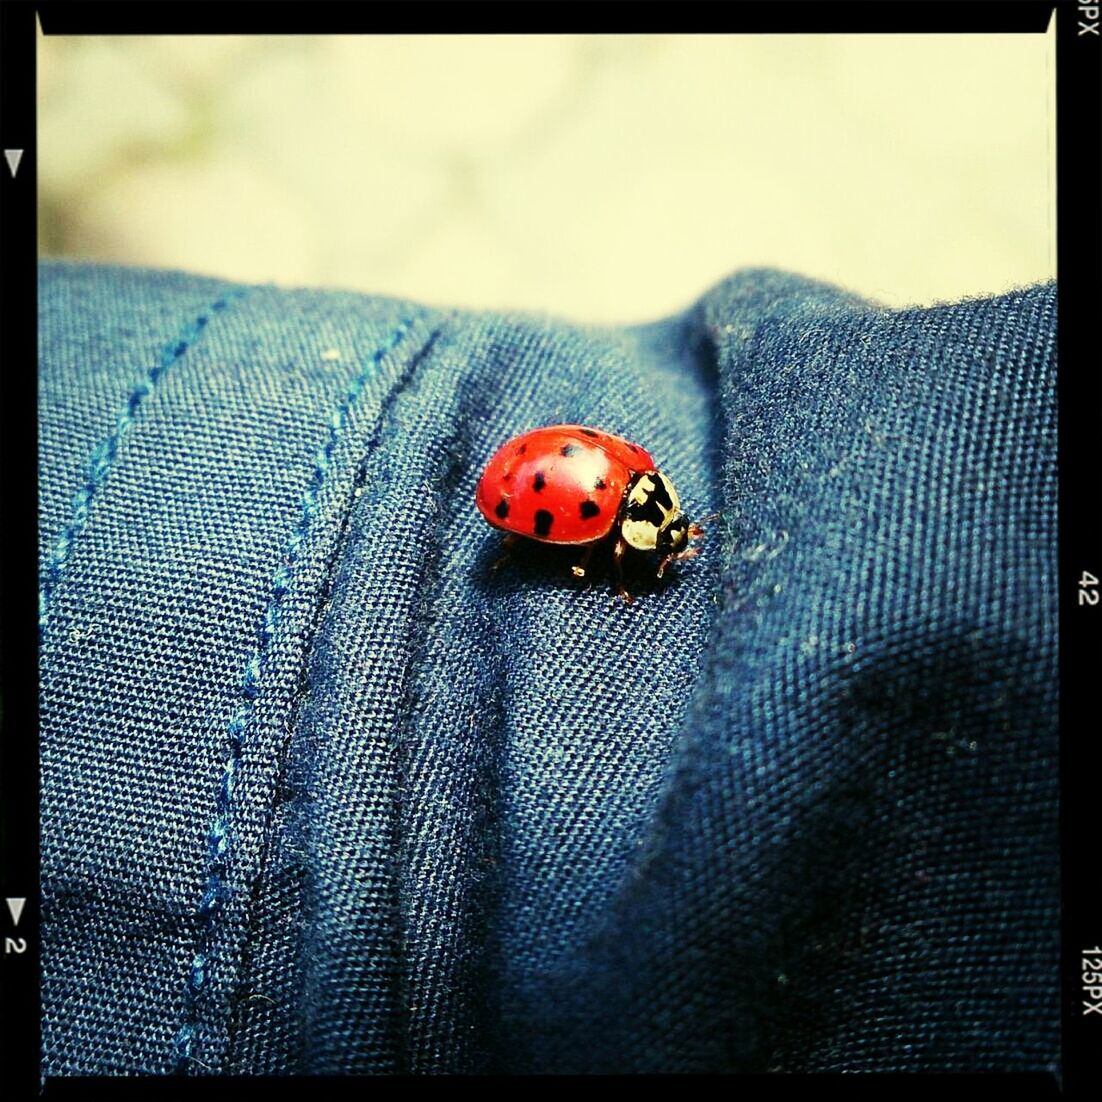 one animal, animal themes, insect, animals in the wild, ladybug, wildlife, close-up, transfer print, red, auto post production filter, spotted, focus on foreground, selective focus, day, outdoors, no people, animal markings, nature, zoology, natural pattern